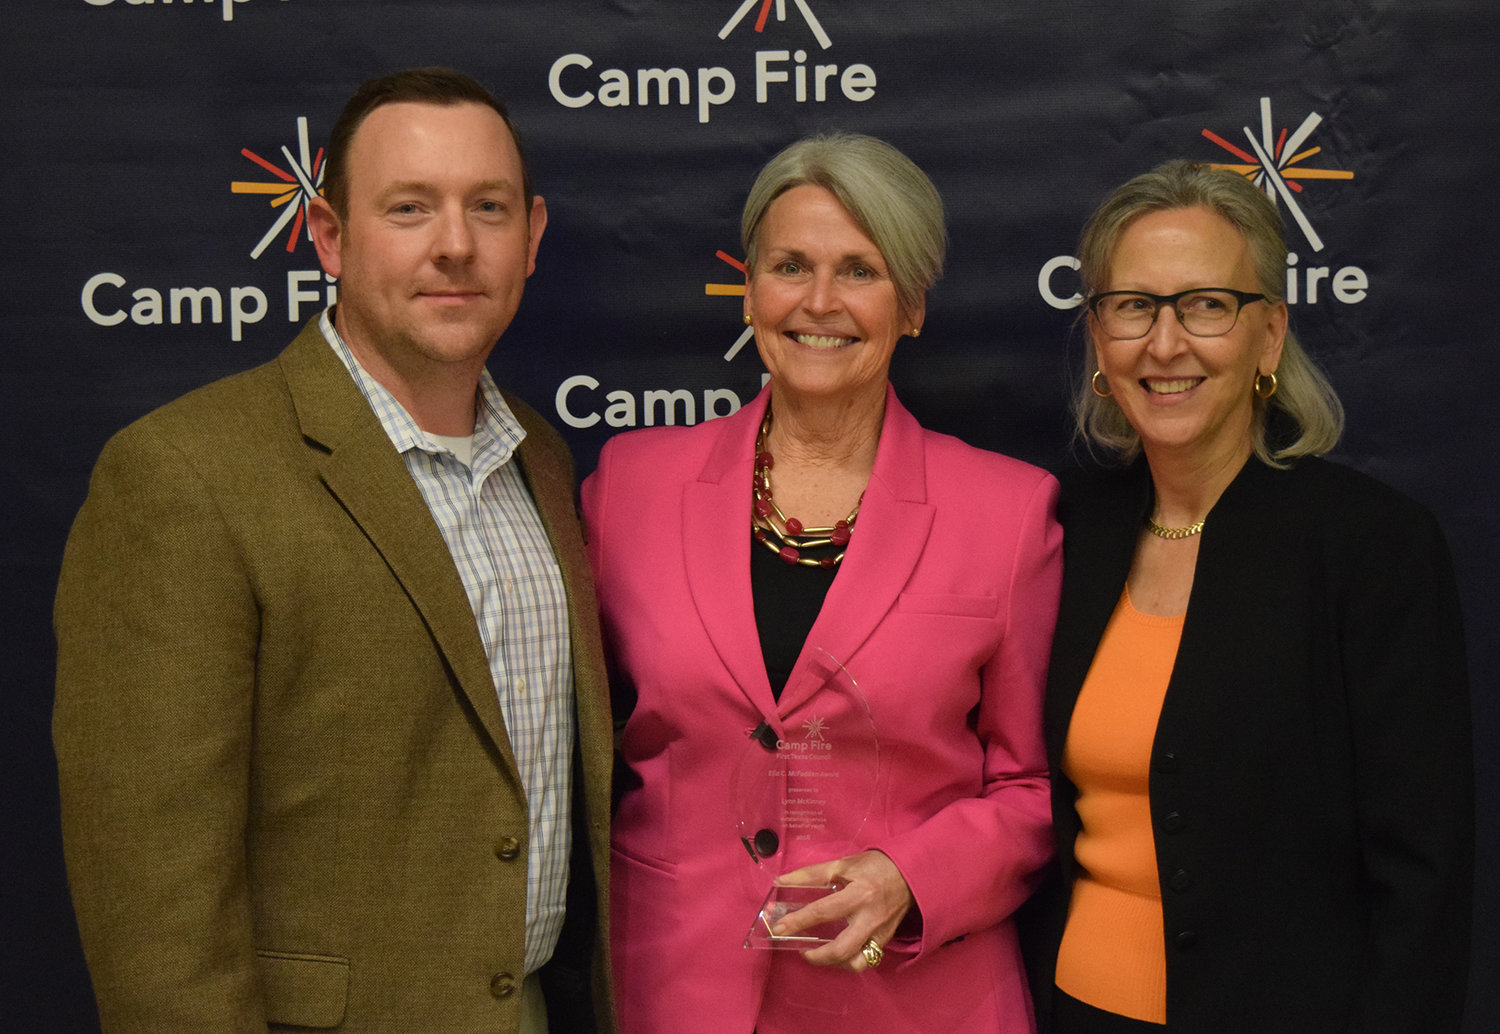 Camp Fire Board member Russ Morris, Lynn McKinney, and Cathy Halliday, Vice President of Youth Development for Camp Fire.